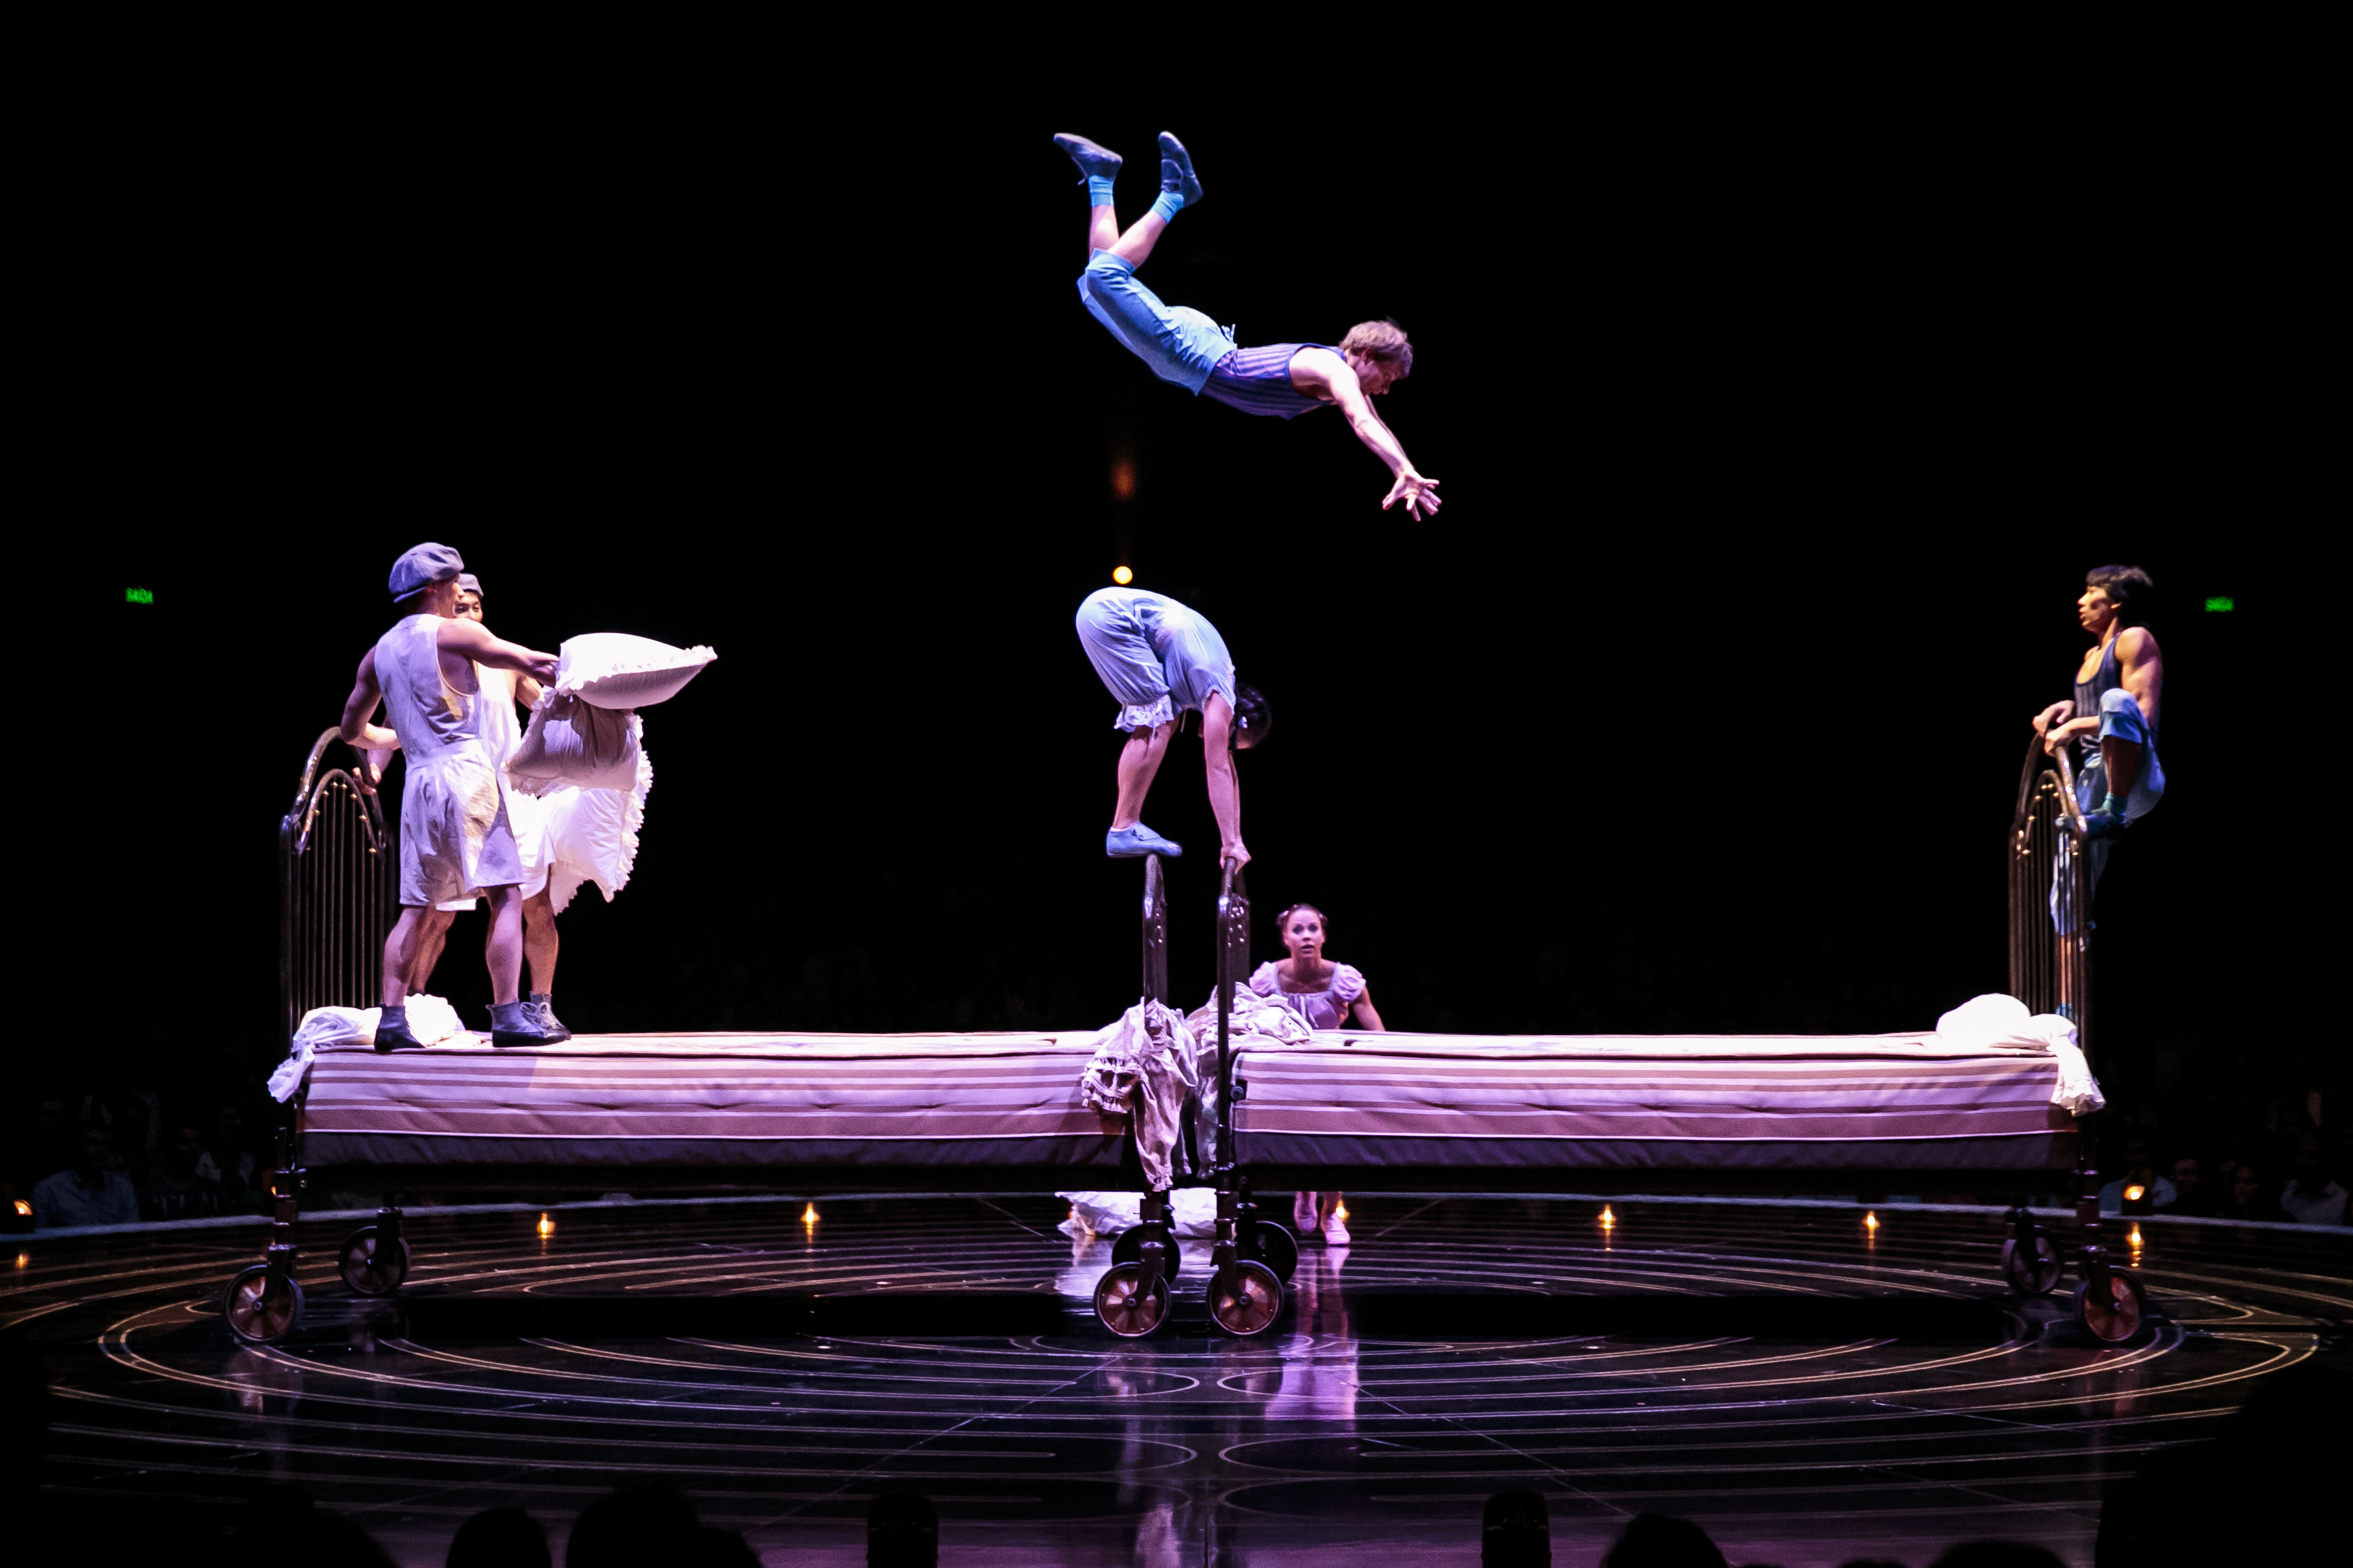 The trampoline act. Photo courtesy of Cirque du Soleil.